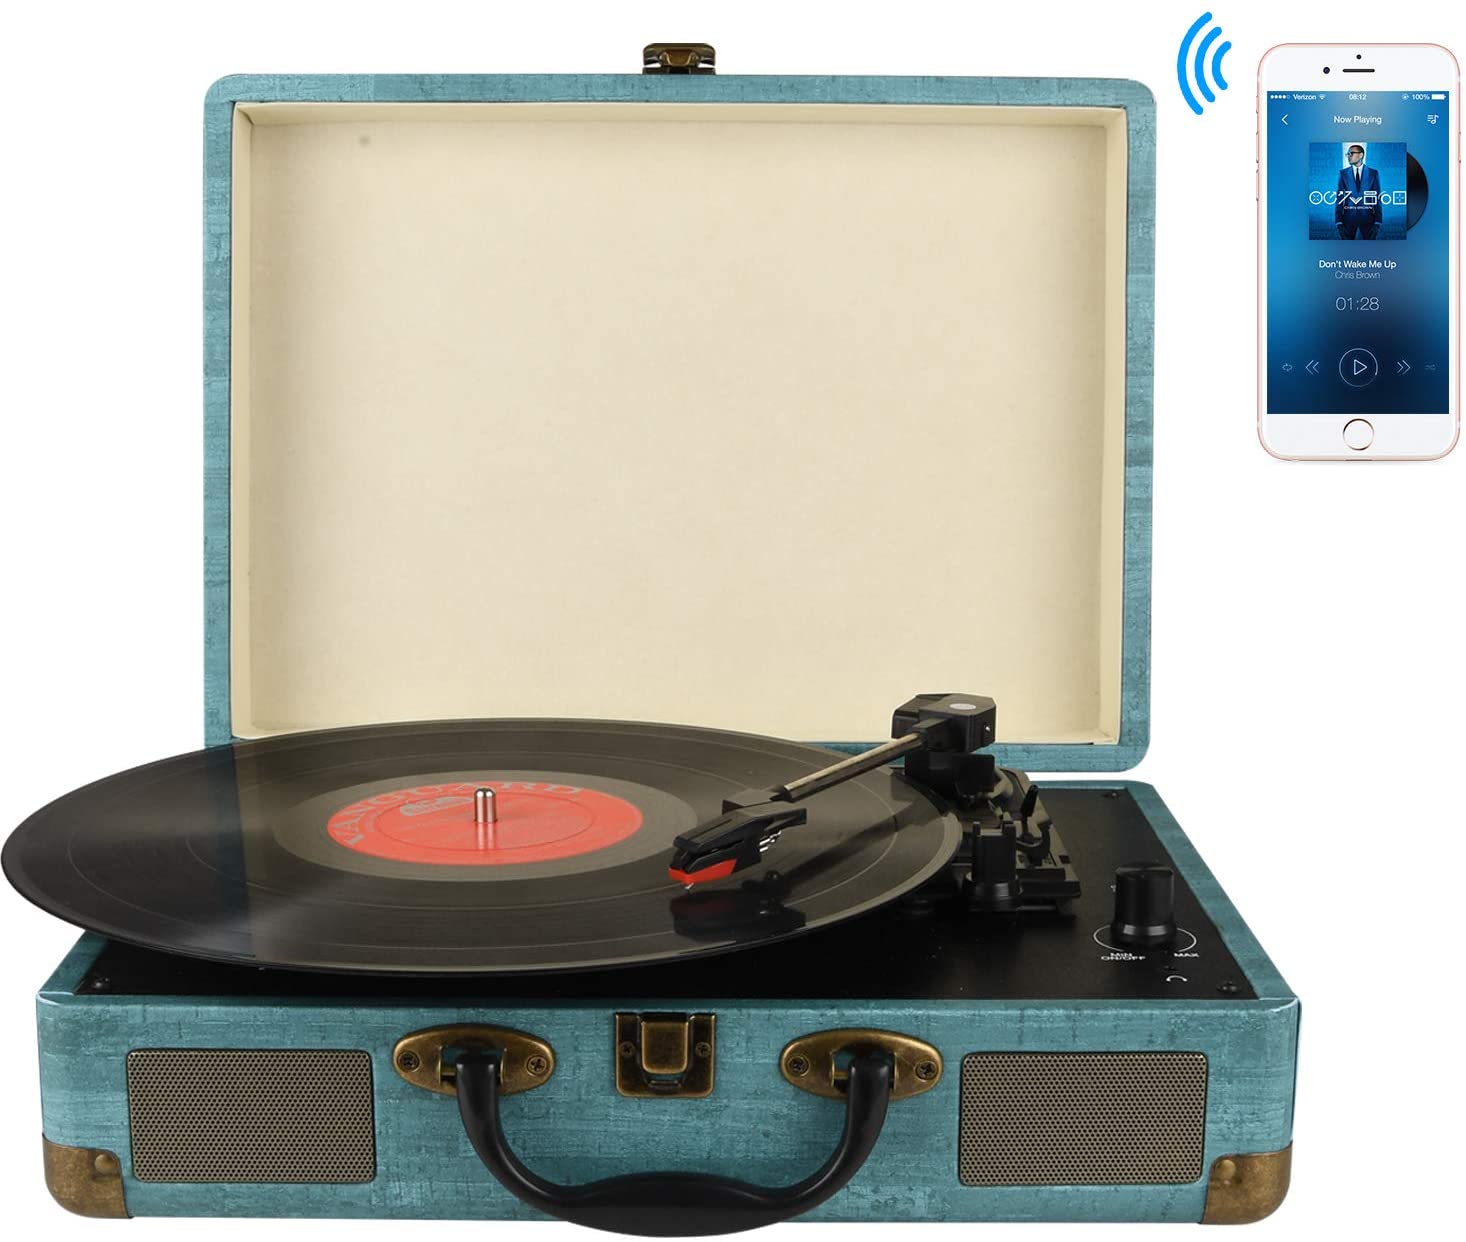 Briefcase Vinyl Players with Speakers from Morocco